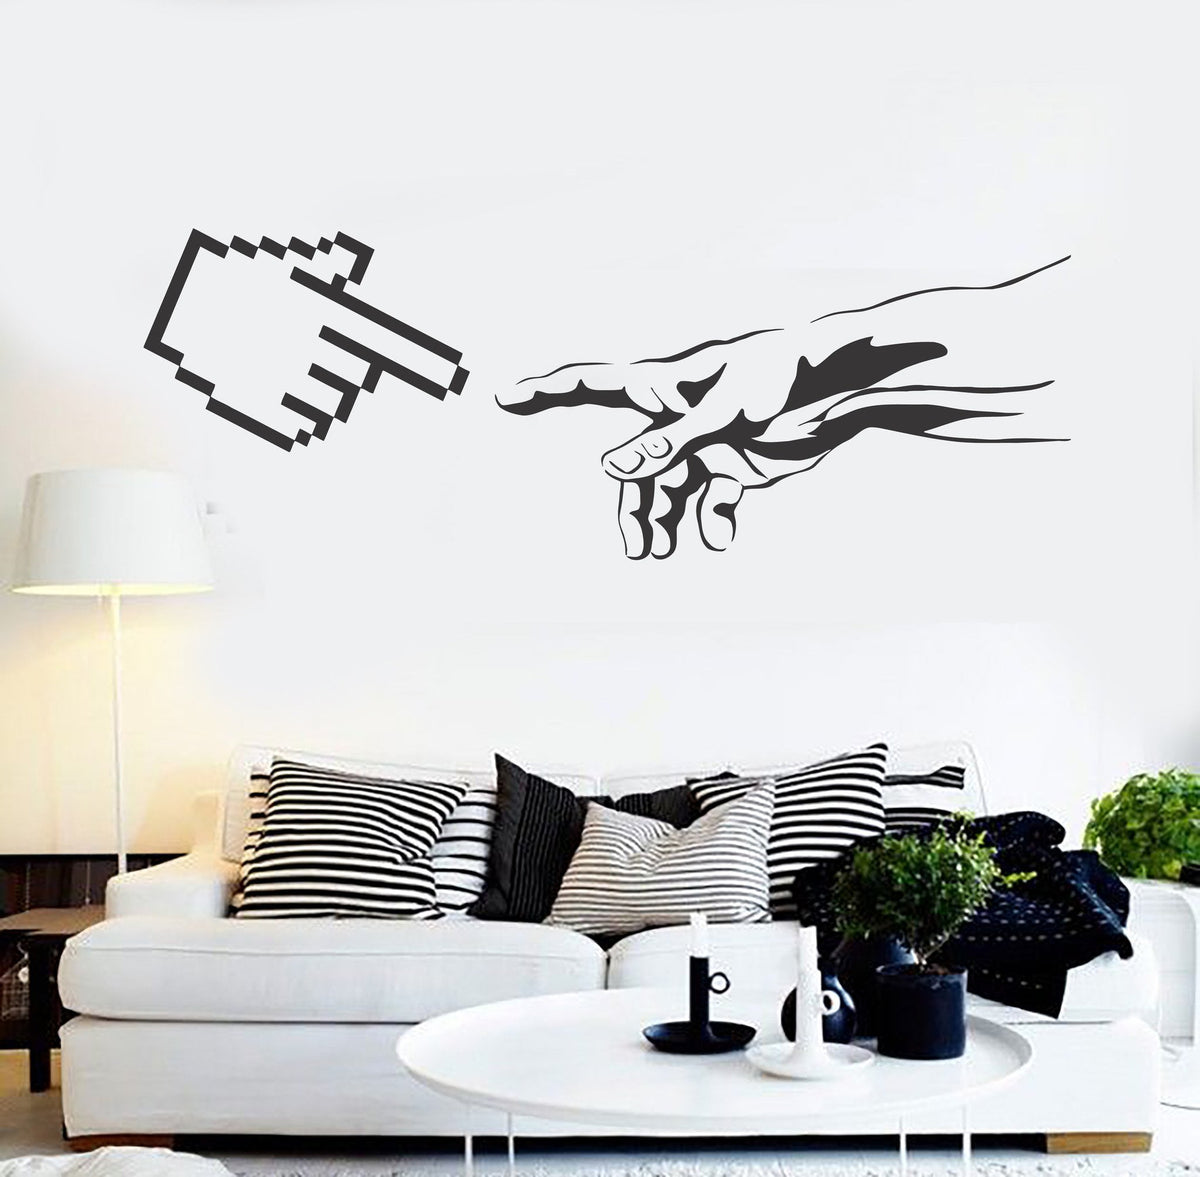 Game Vinyl Wall Decal Computer PC Gamer Video Gadgets Stickers Unique —  Wallstickers4you